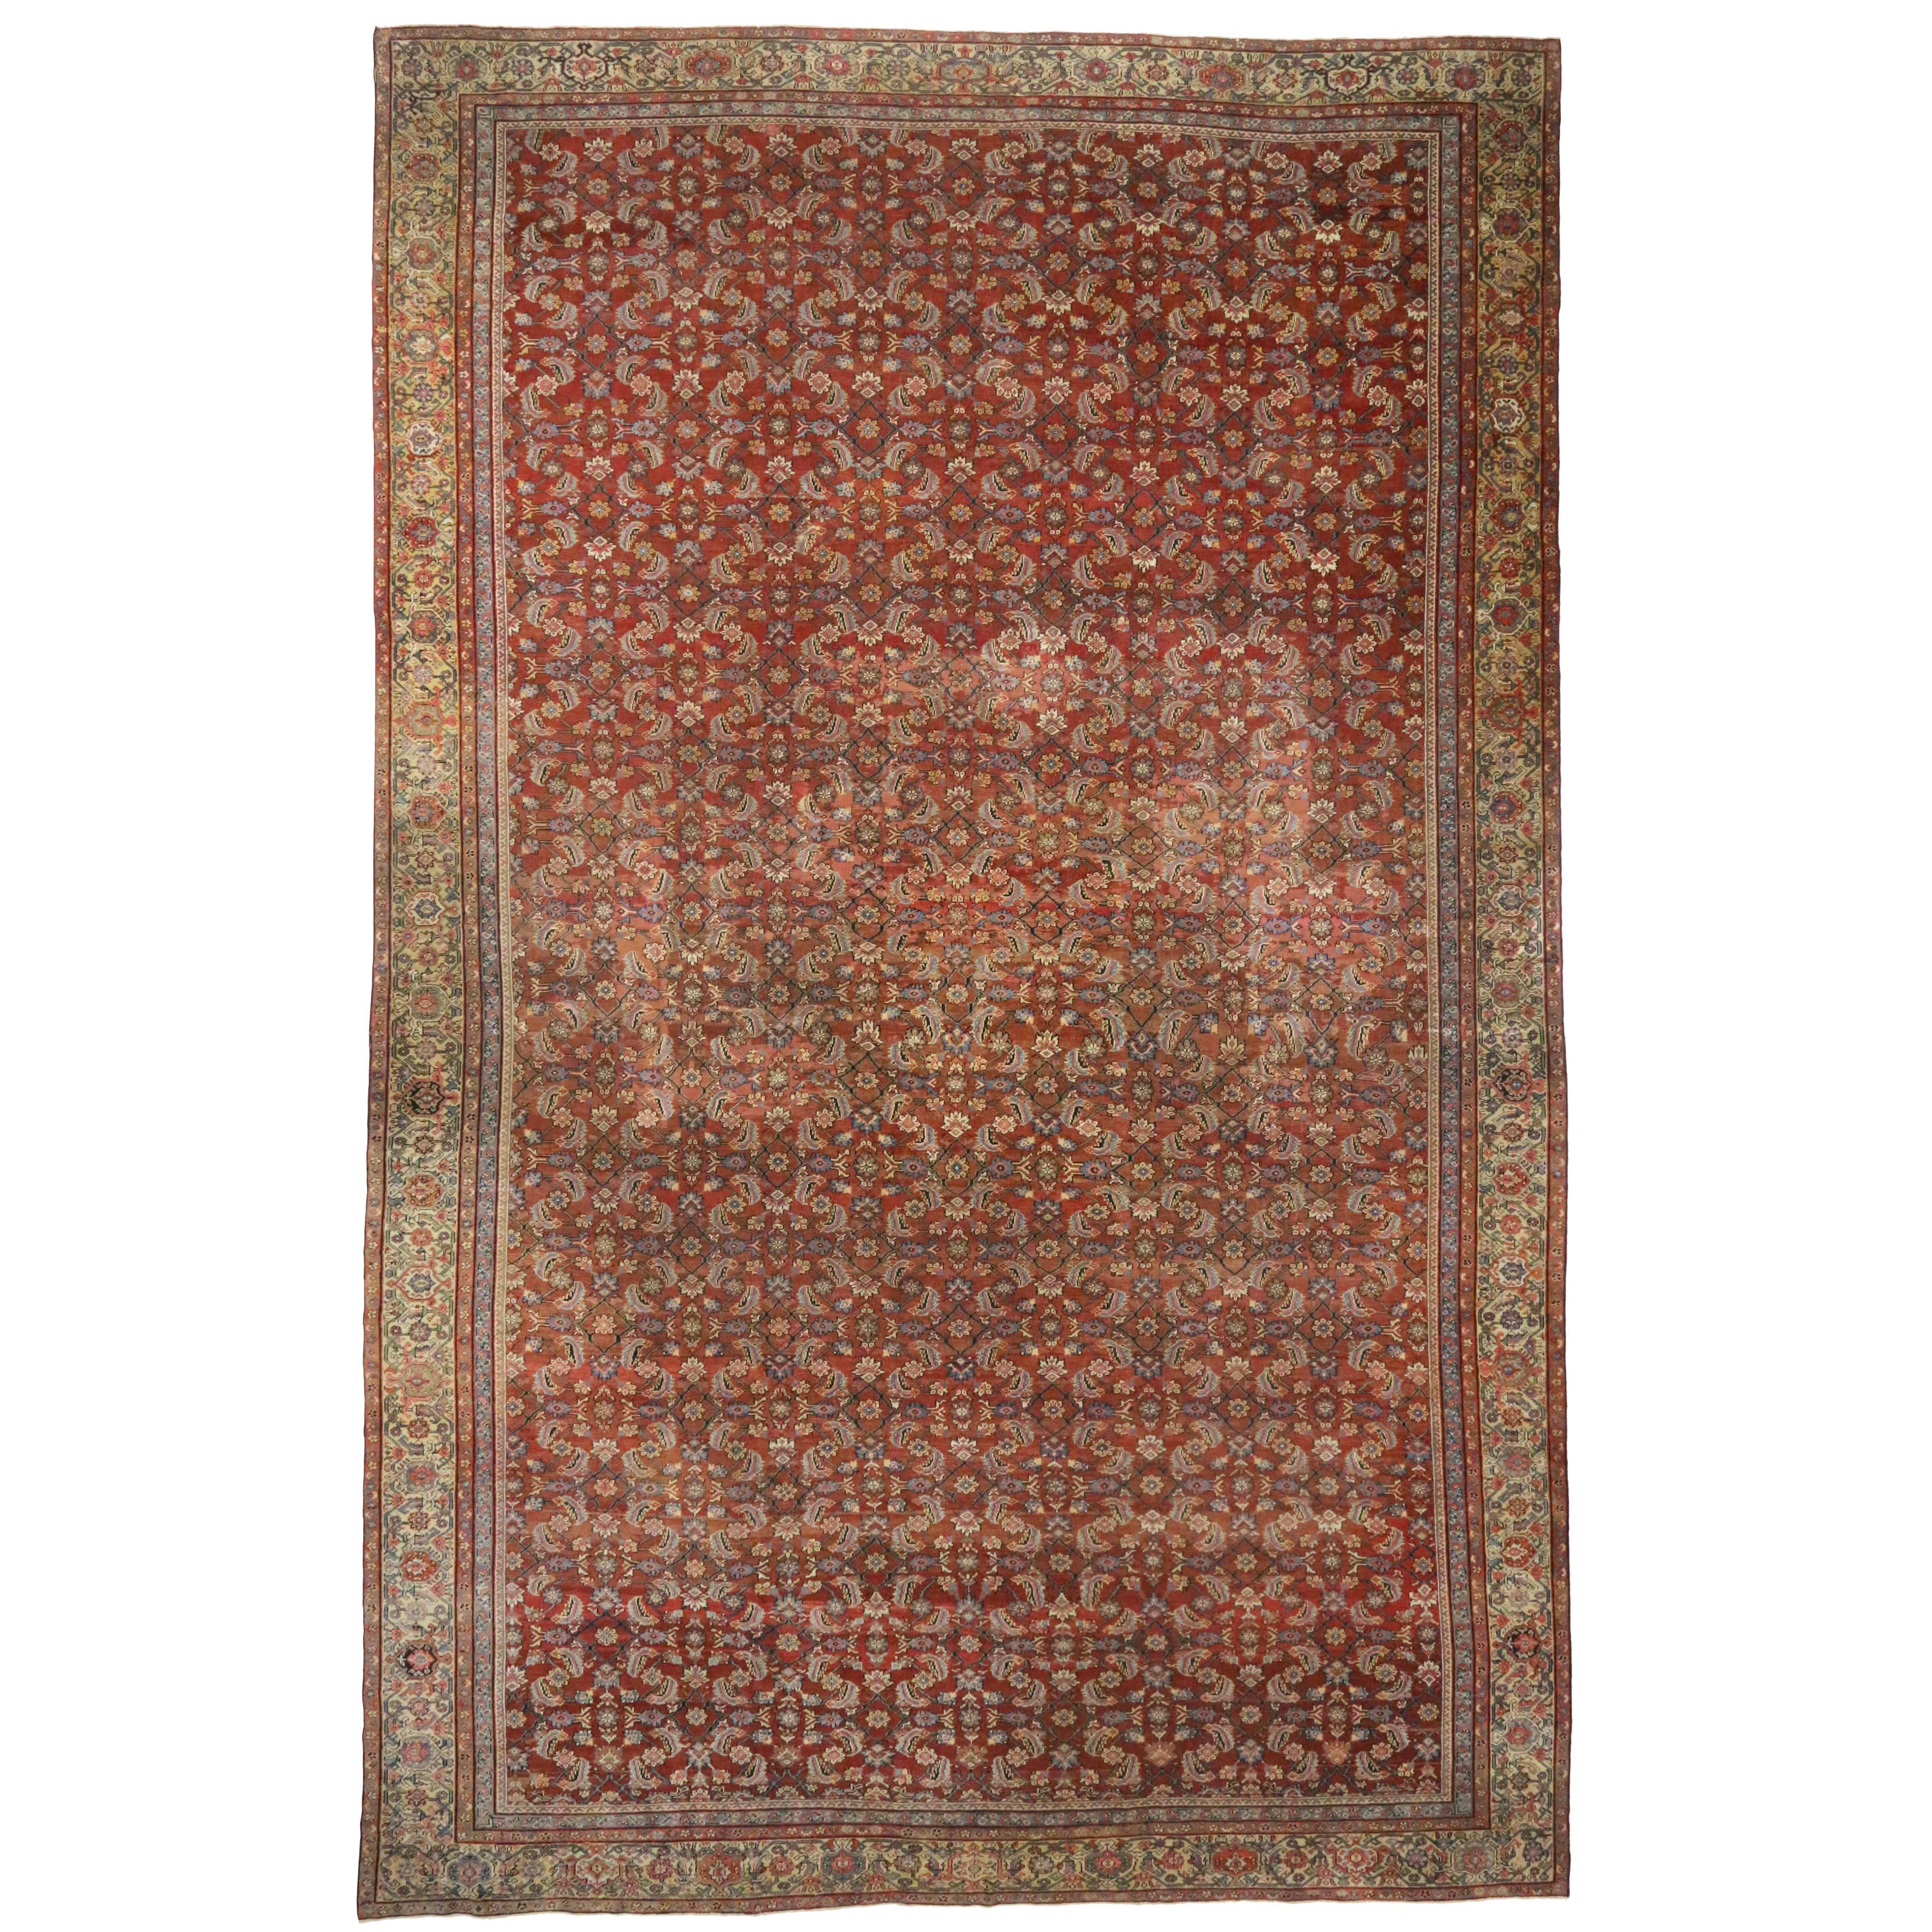 1880s Oversized Antique Persian Farahan Rug, Hotel Lobby Size Carpet For Sale